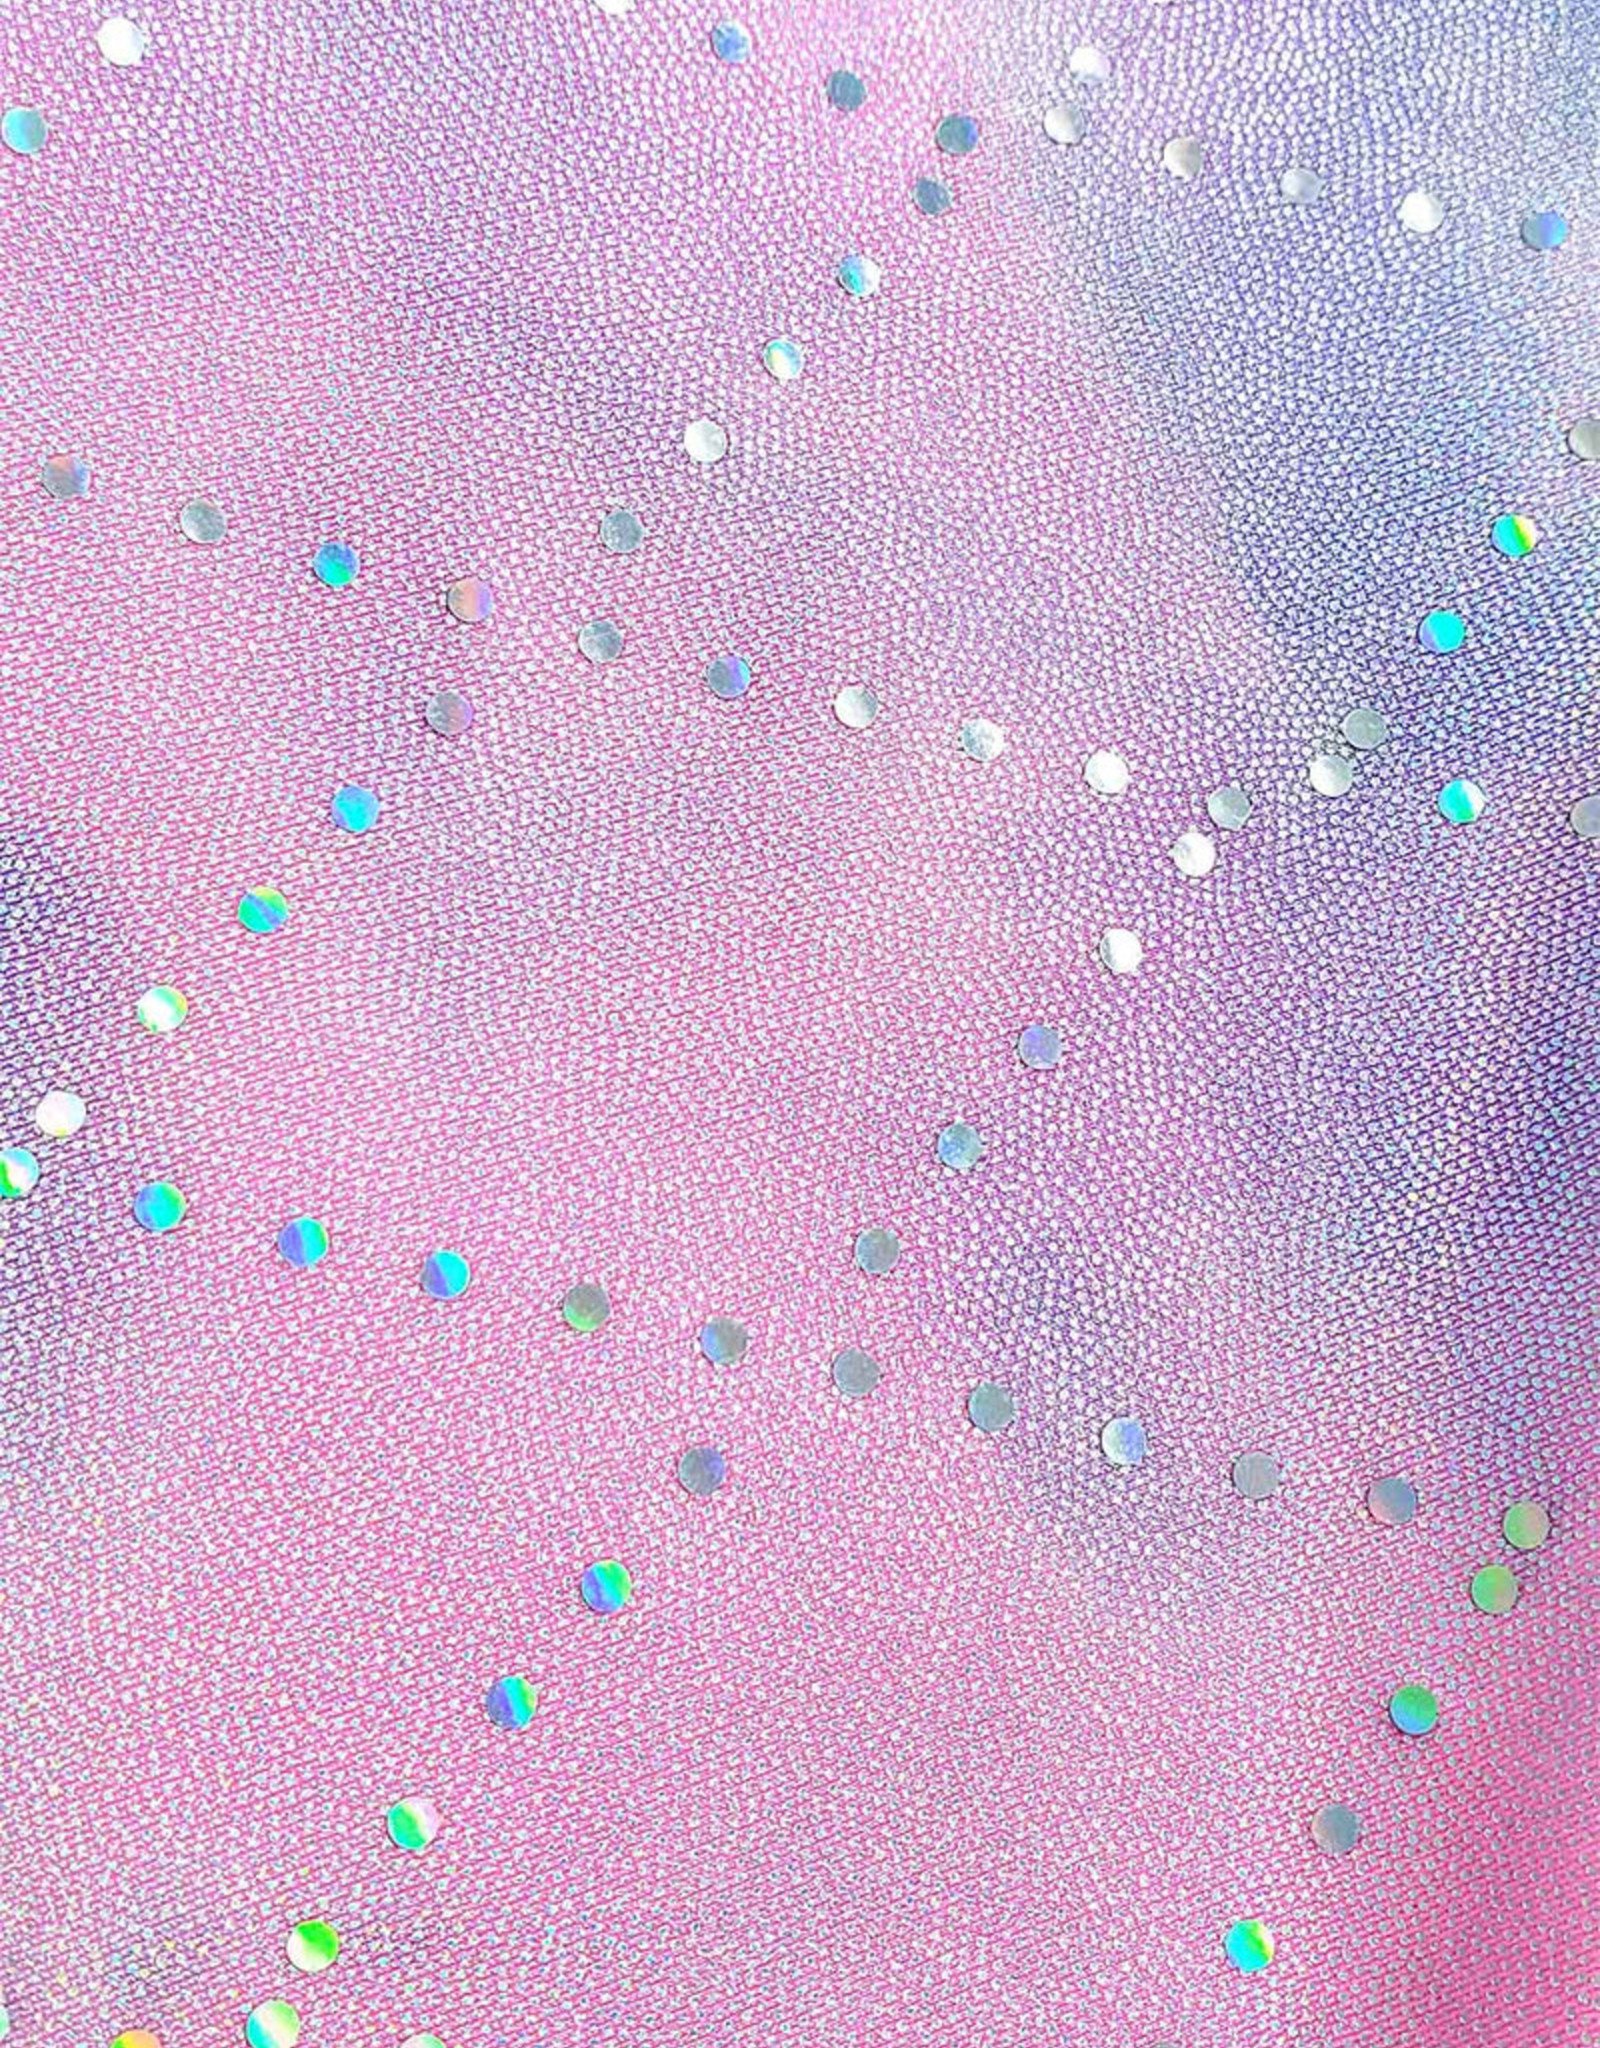 Buy To The Moon Pink and Purple Hologram Unitard by Destira